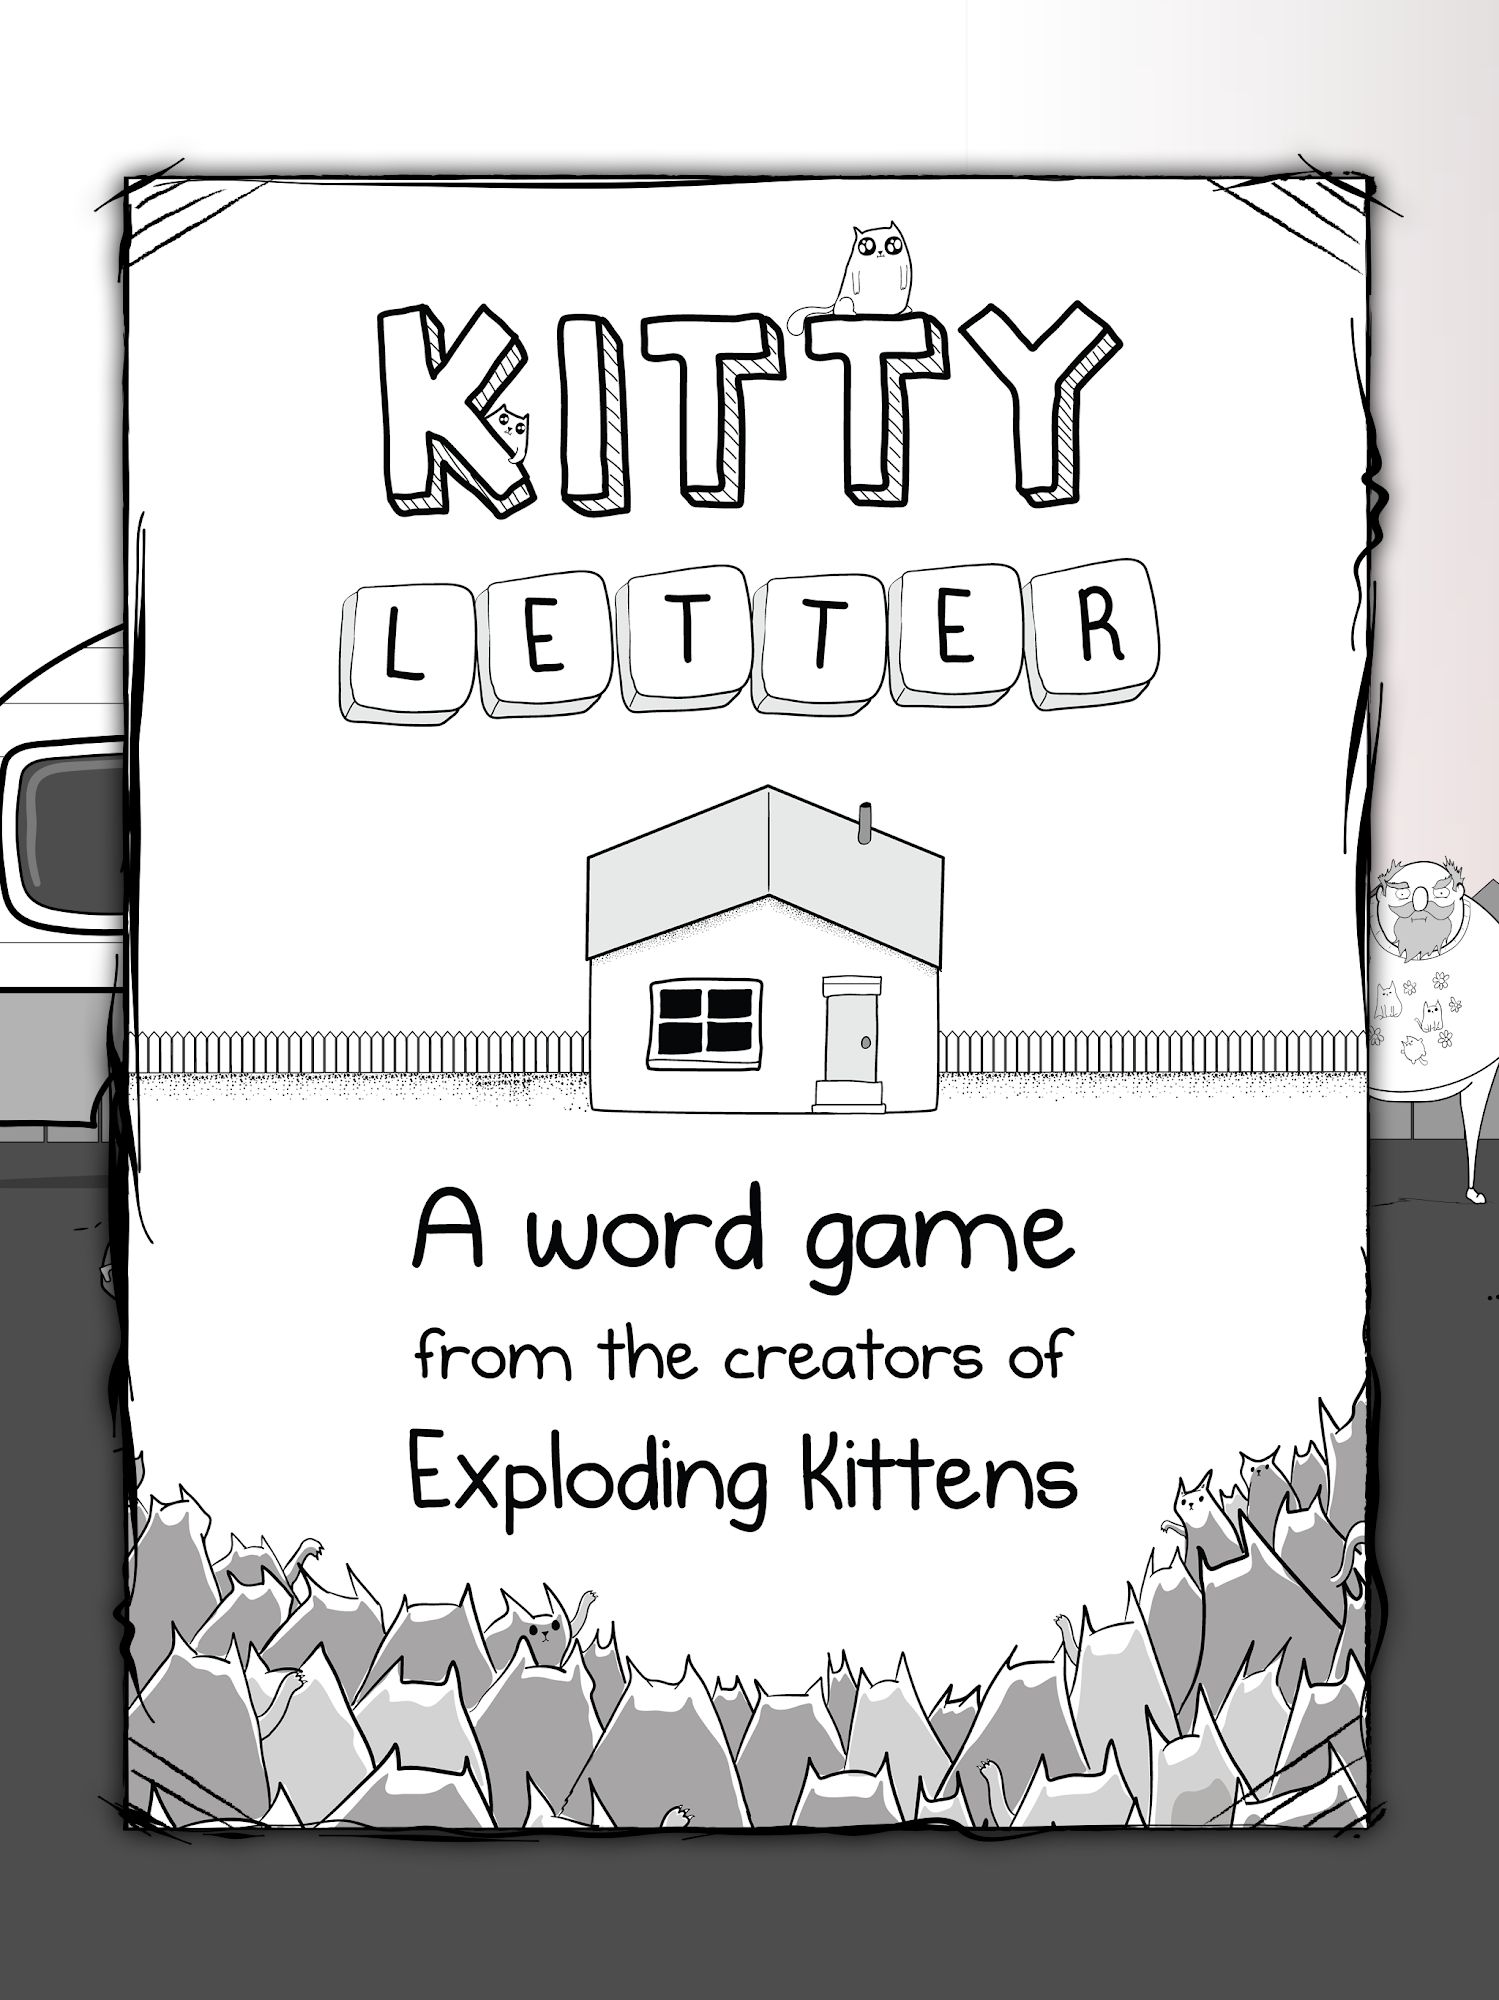 Download Kitty Letter Android free game.